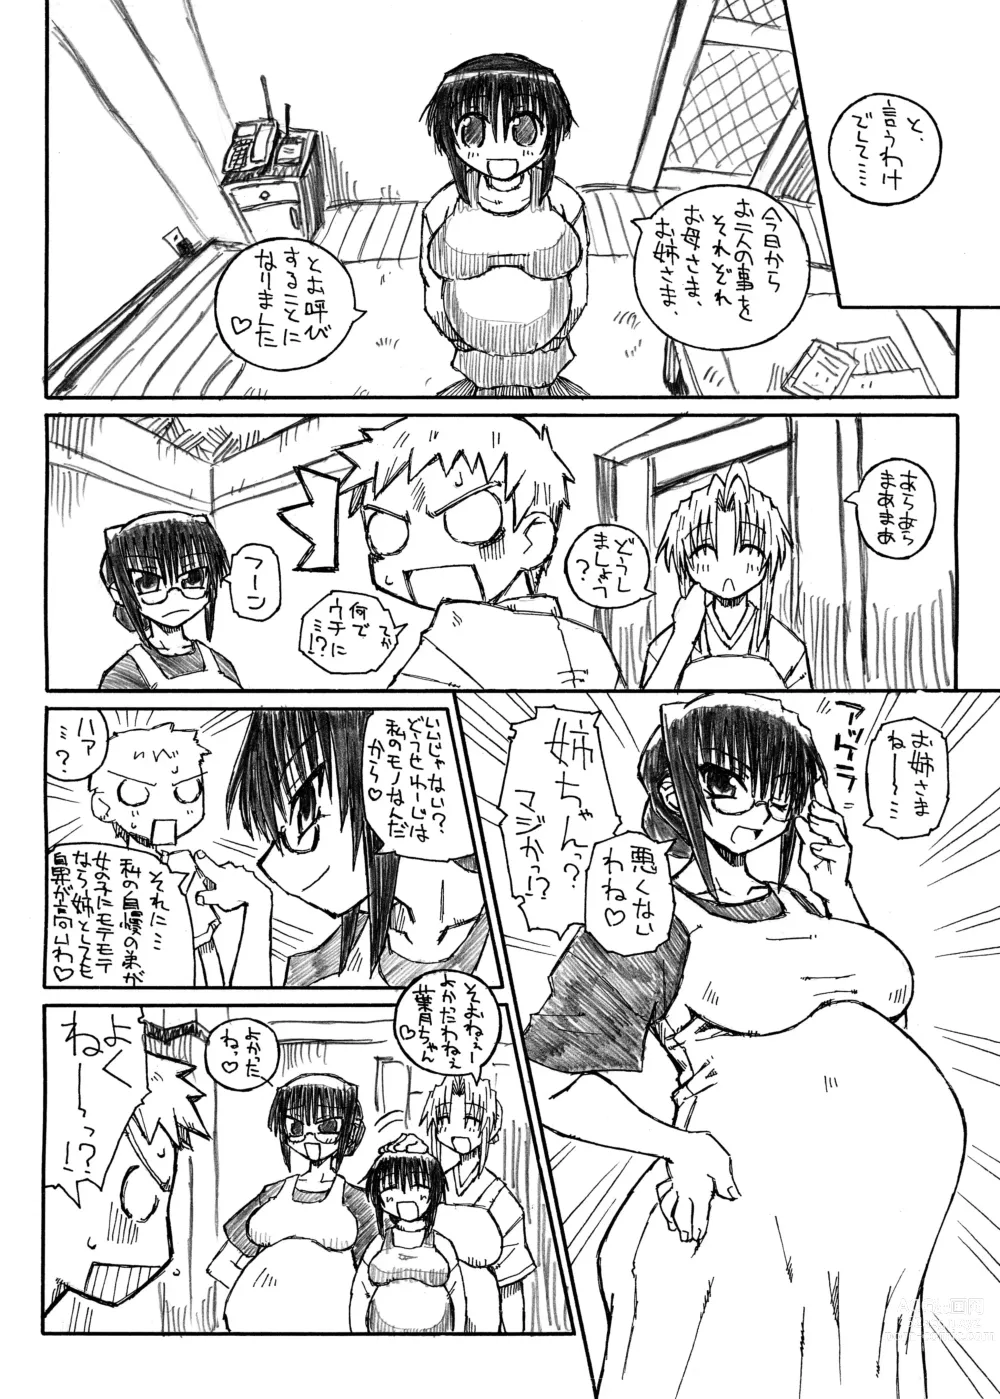 Page 28 of doujinshi Pregnant Summer